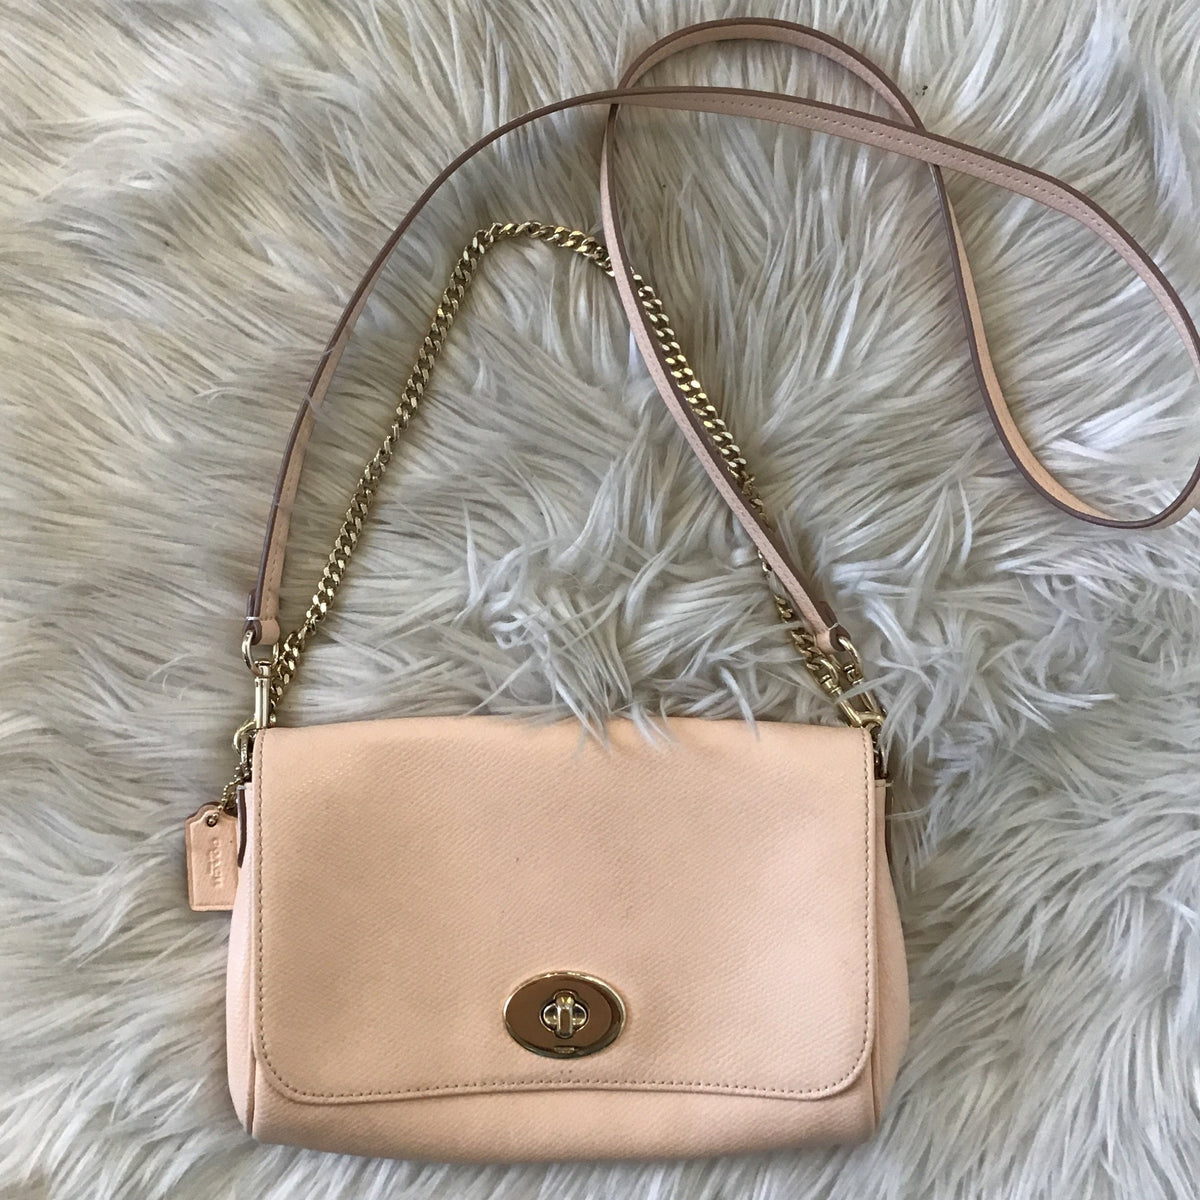 COACH Apricot Leather Turnlock Crossbody/Shoulder Bag – Style